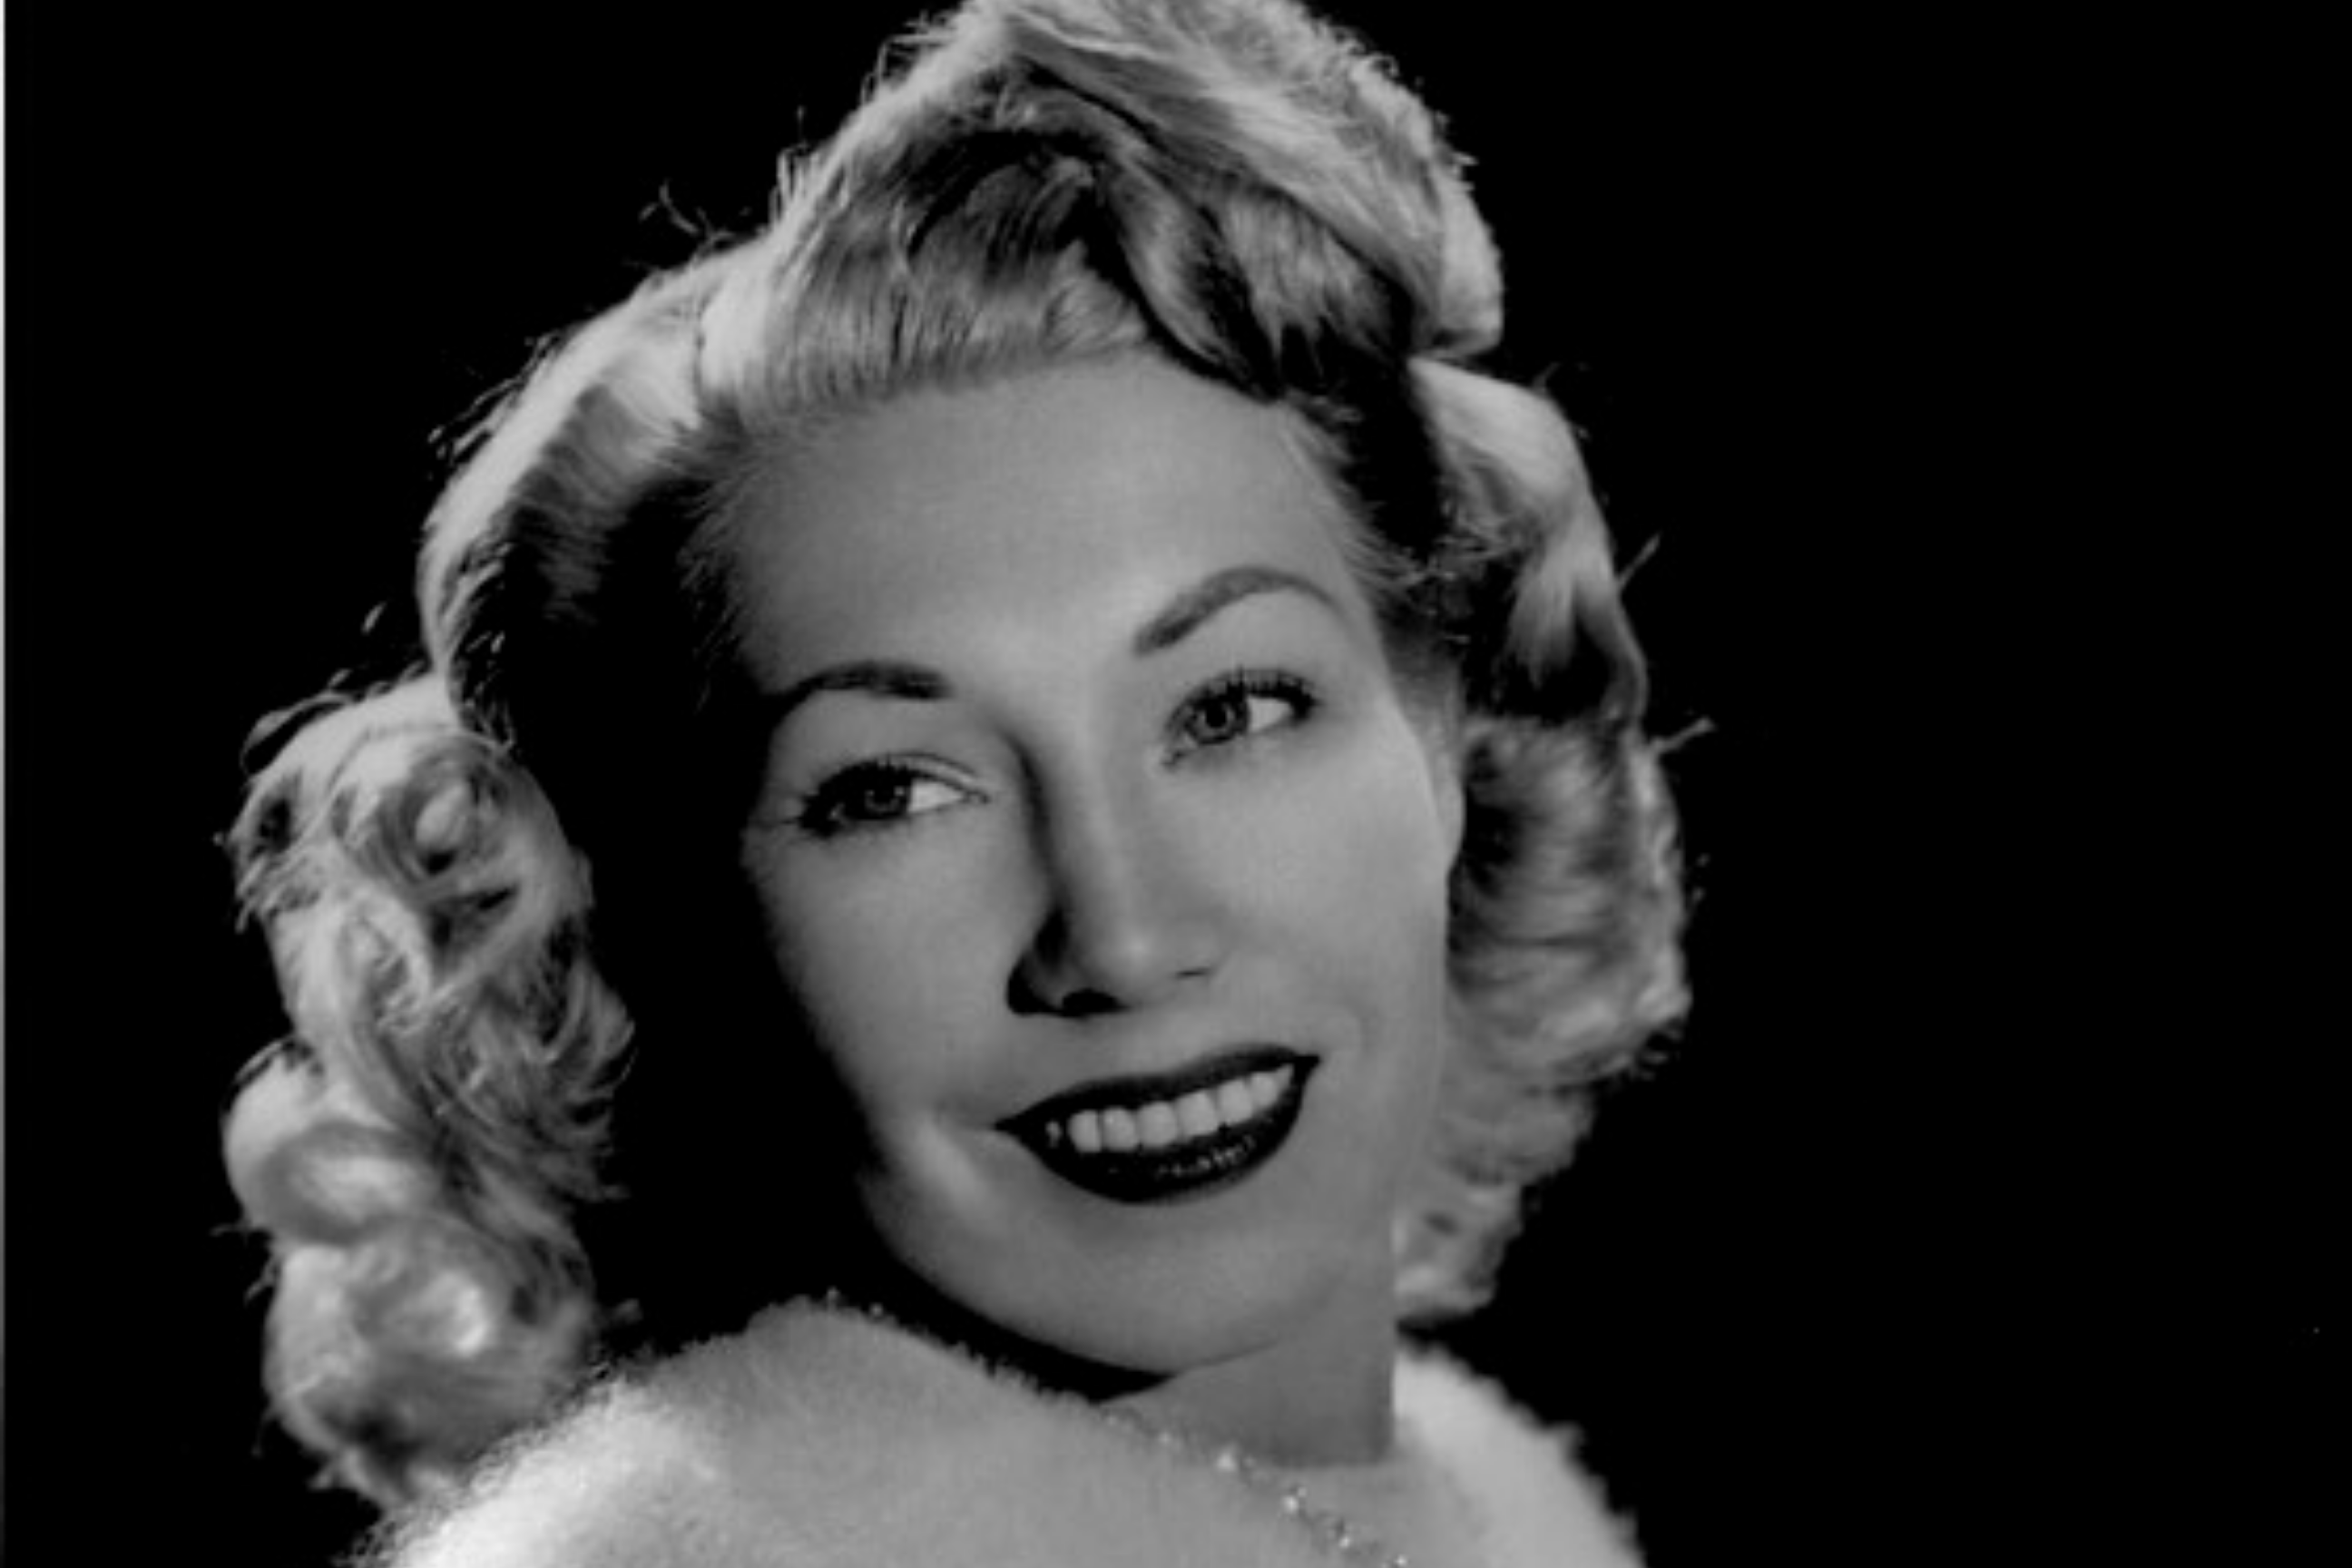 Dolores Fuller smiles and looks to the left. Her blonde hair is coiffed in a 40s style.